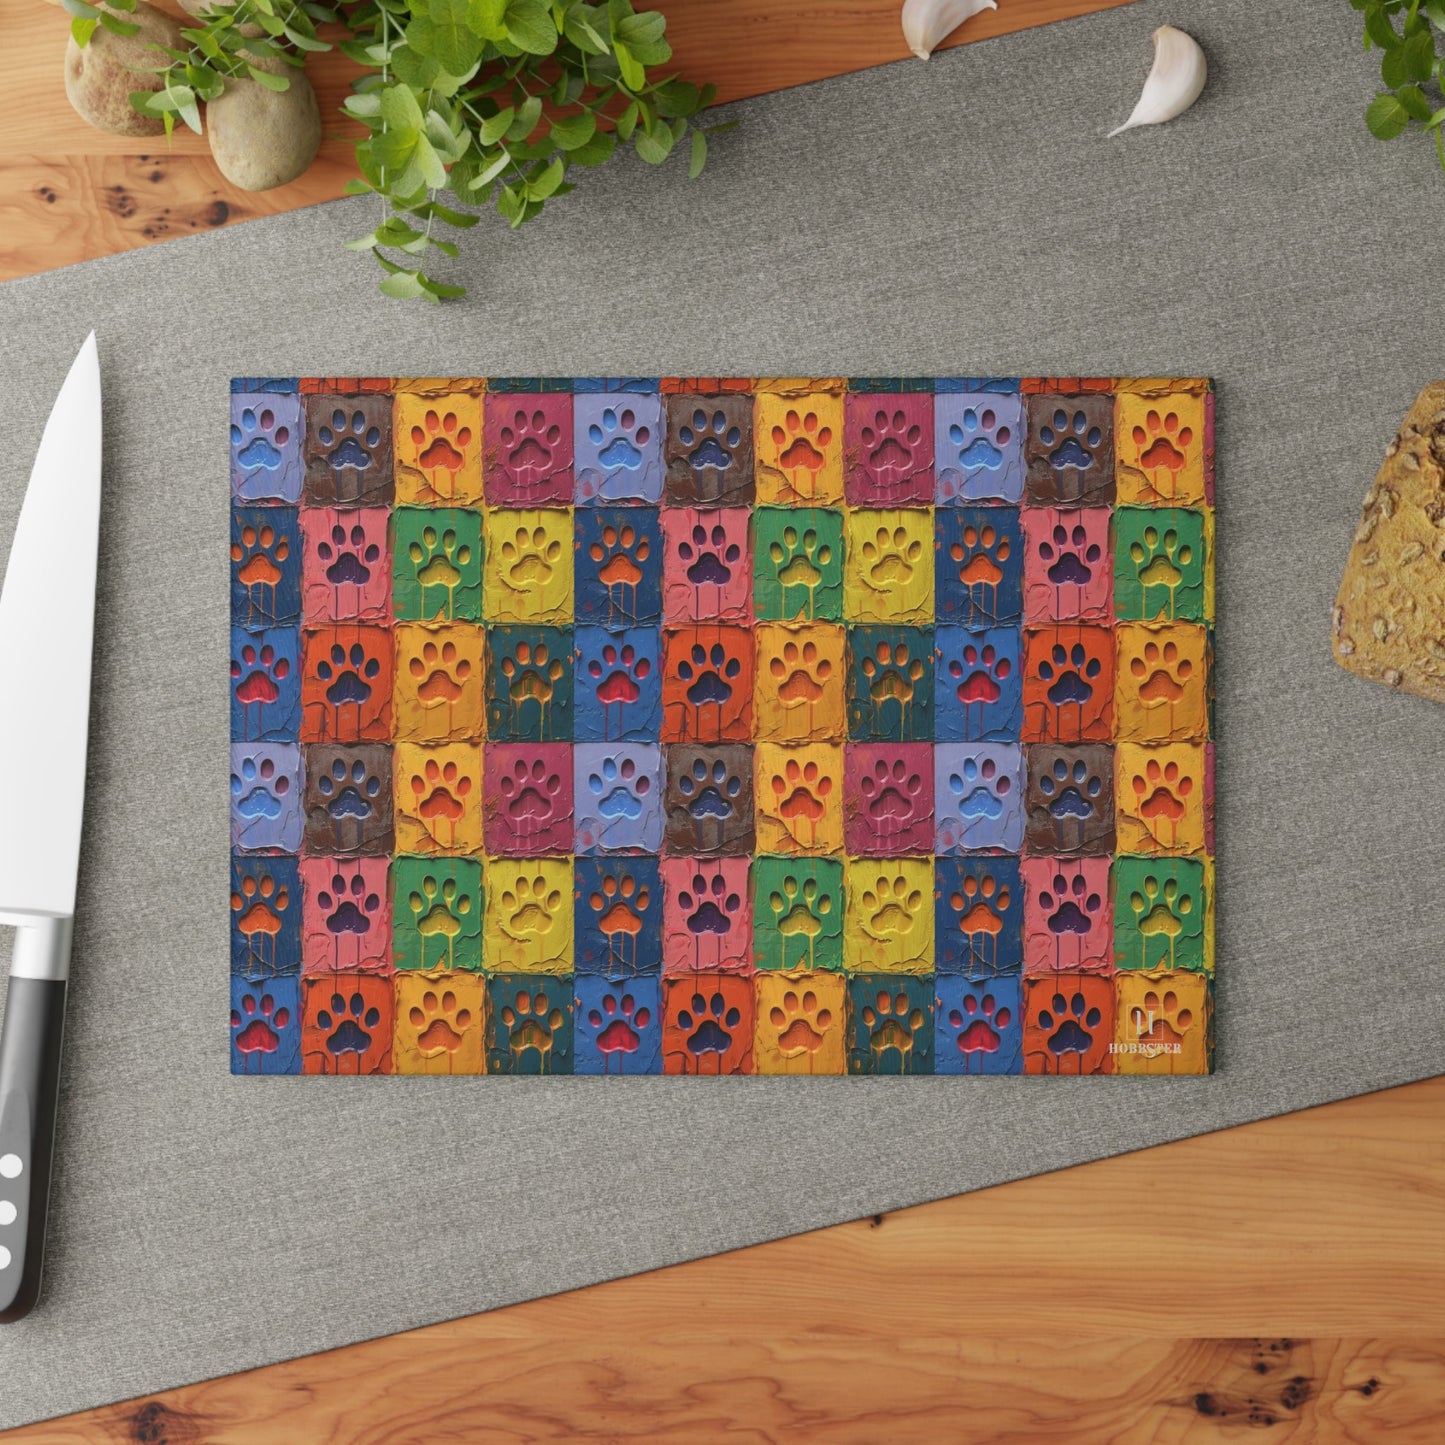 Glass Cutting Board Featuring Large Painted Paw Prints - Hobbster